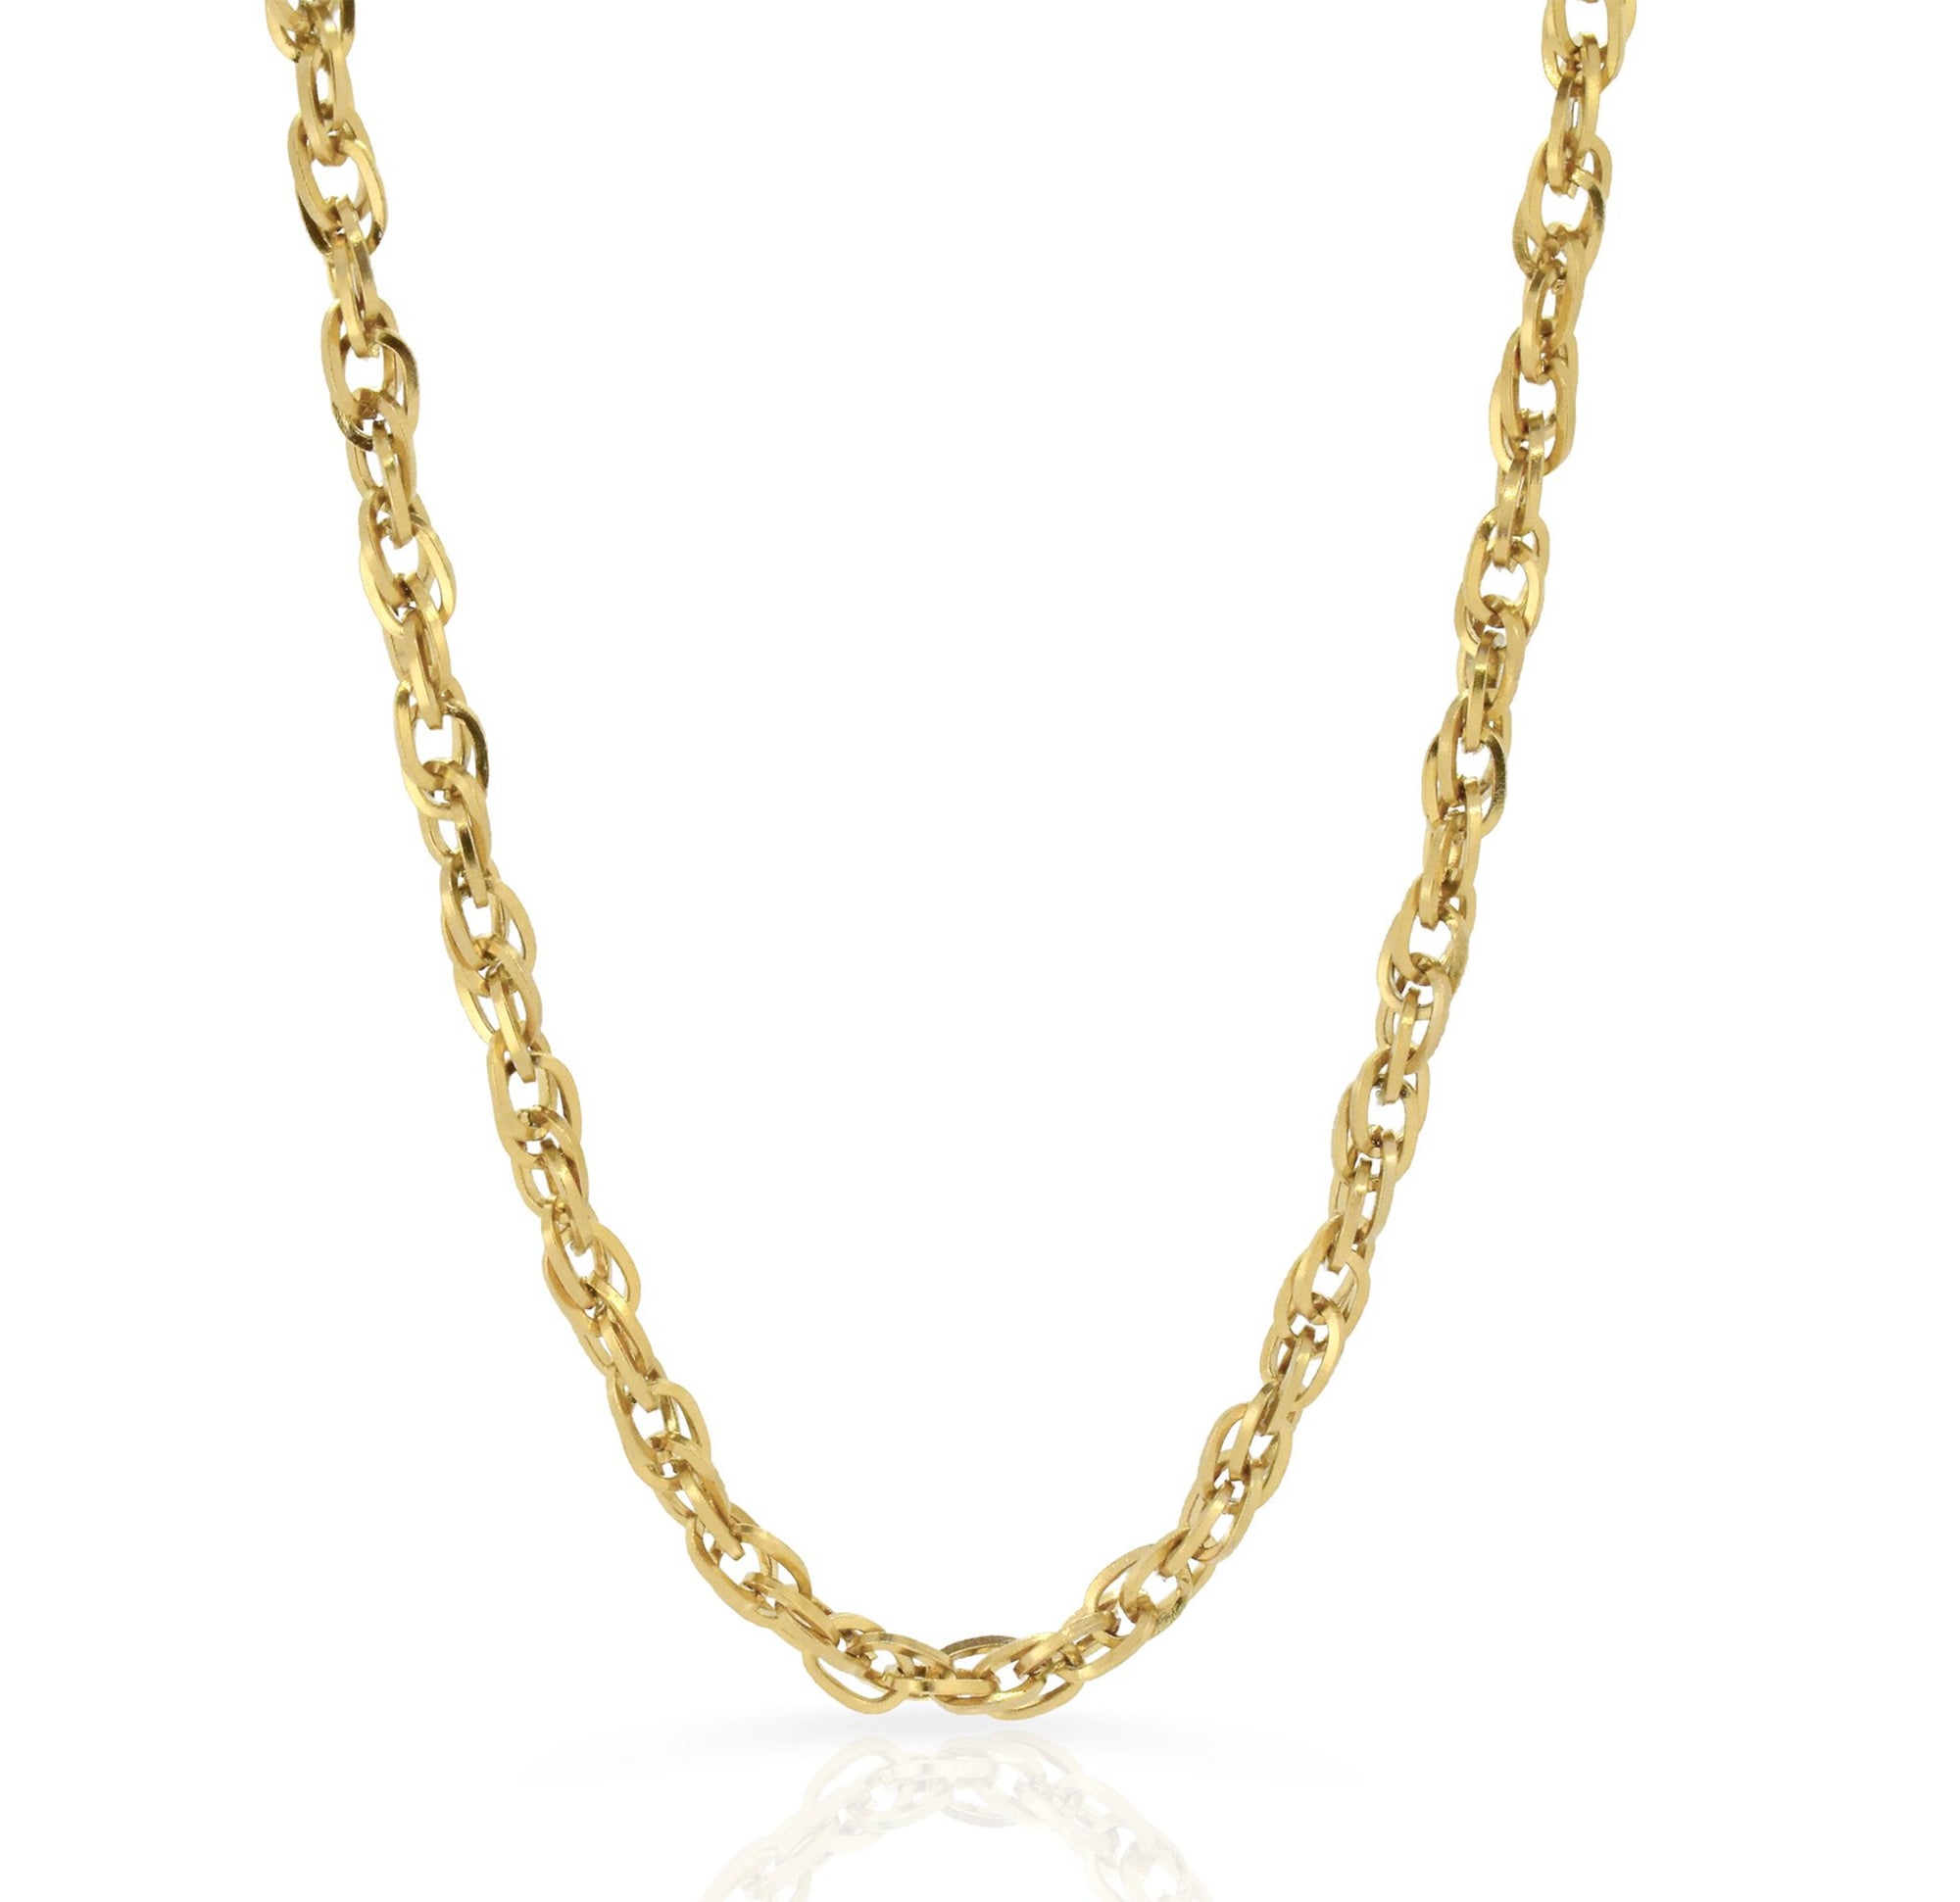 gold rope chain necklace waterproof